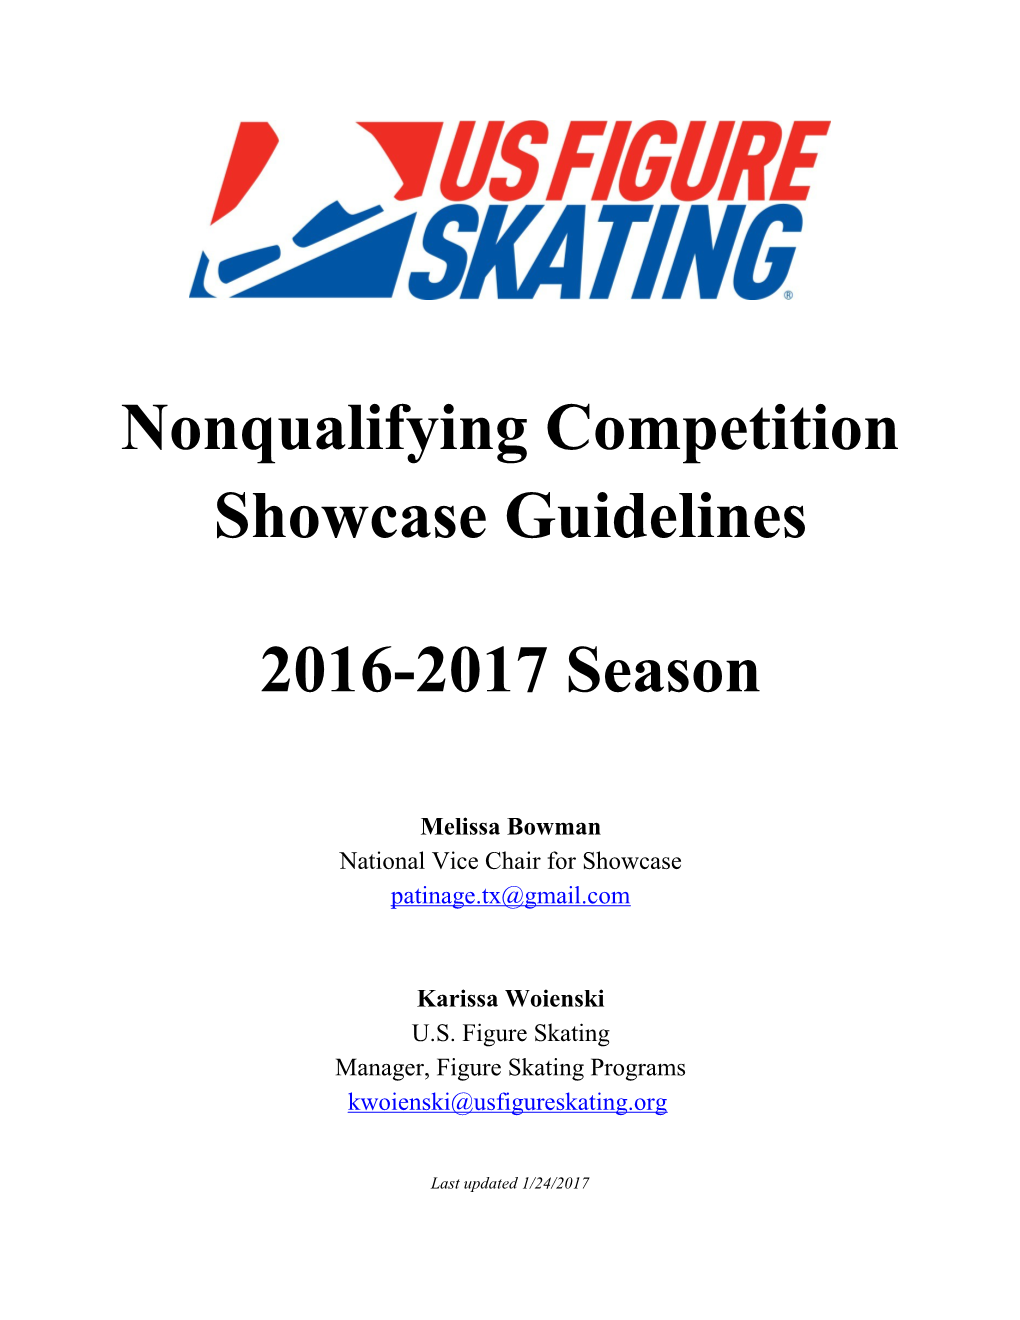 Nonqualifying Competition Showcase Guidelines